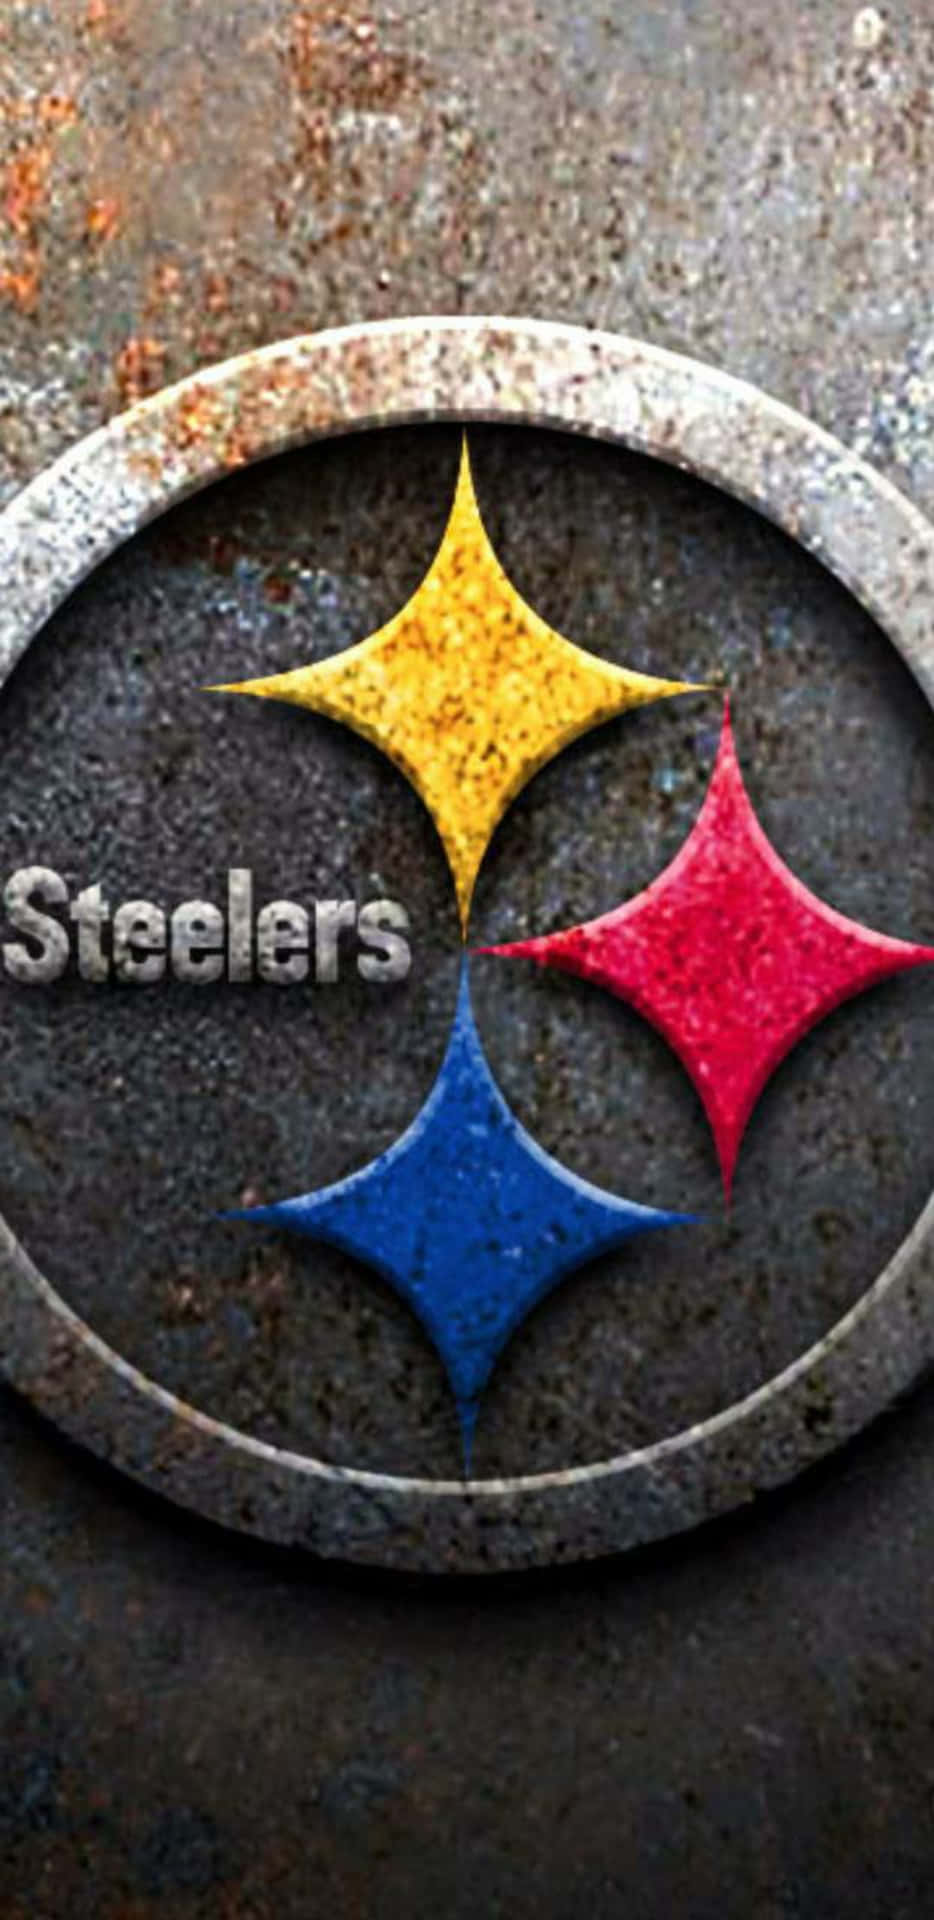 Show Everyone Who You Support With This Steelers Phone